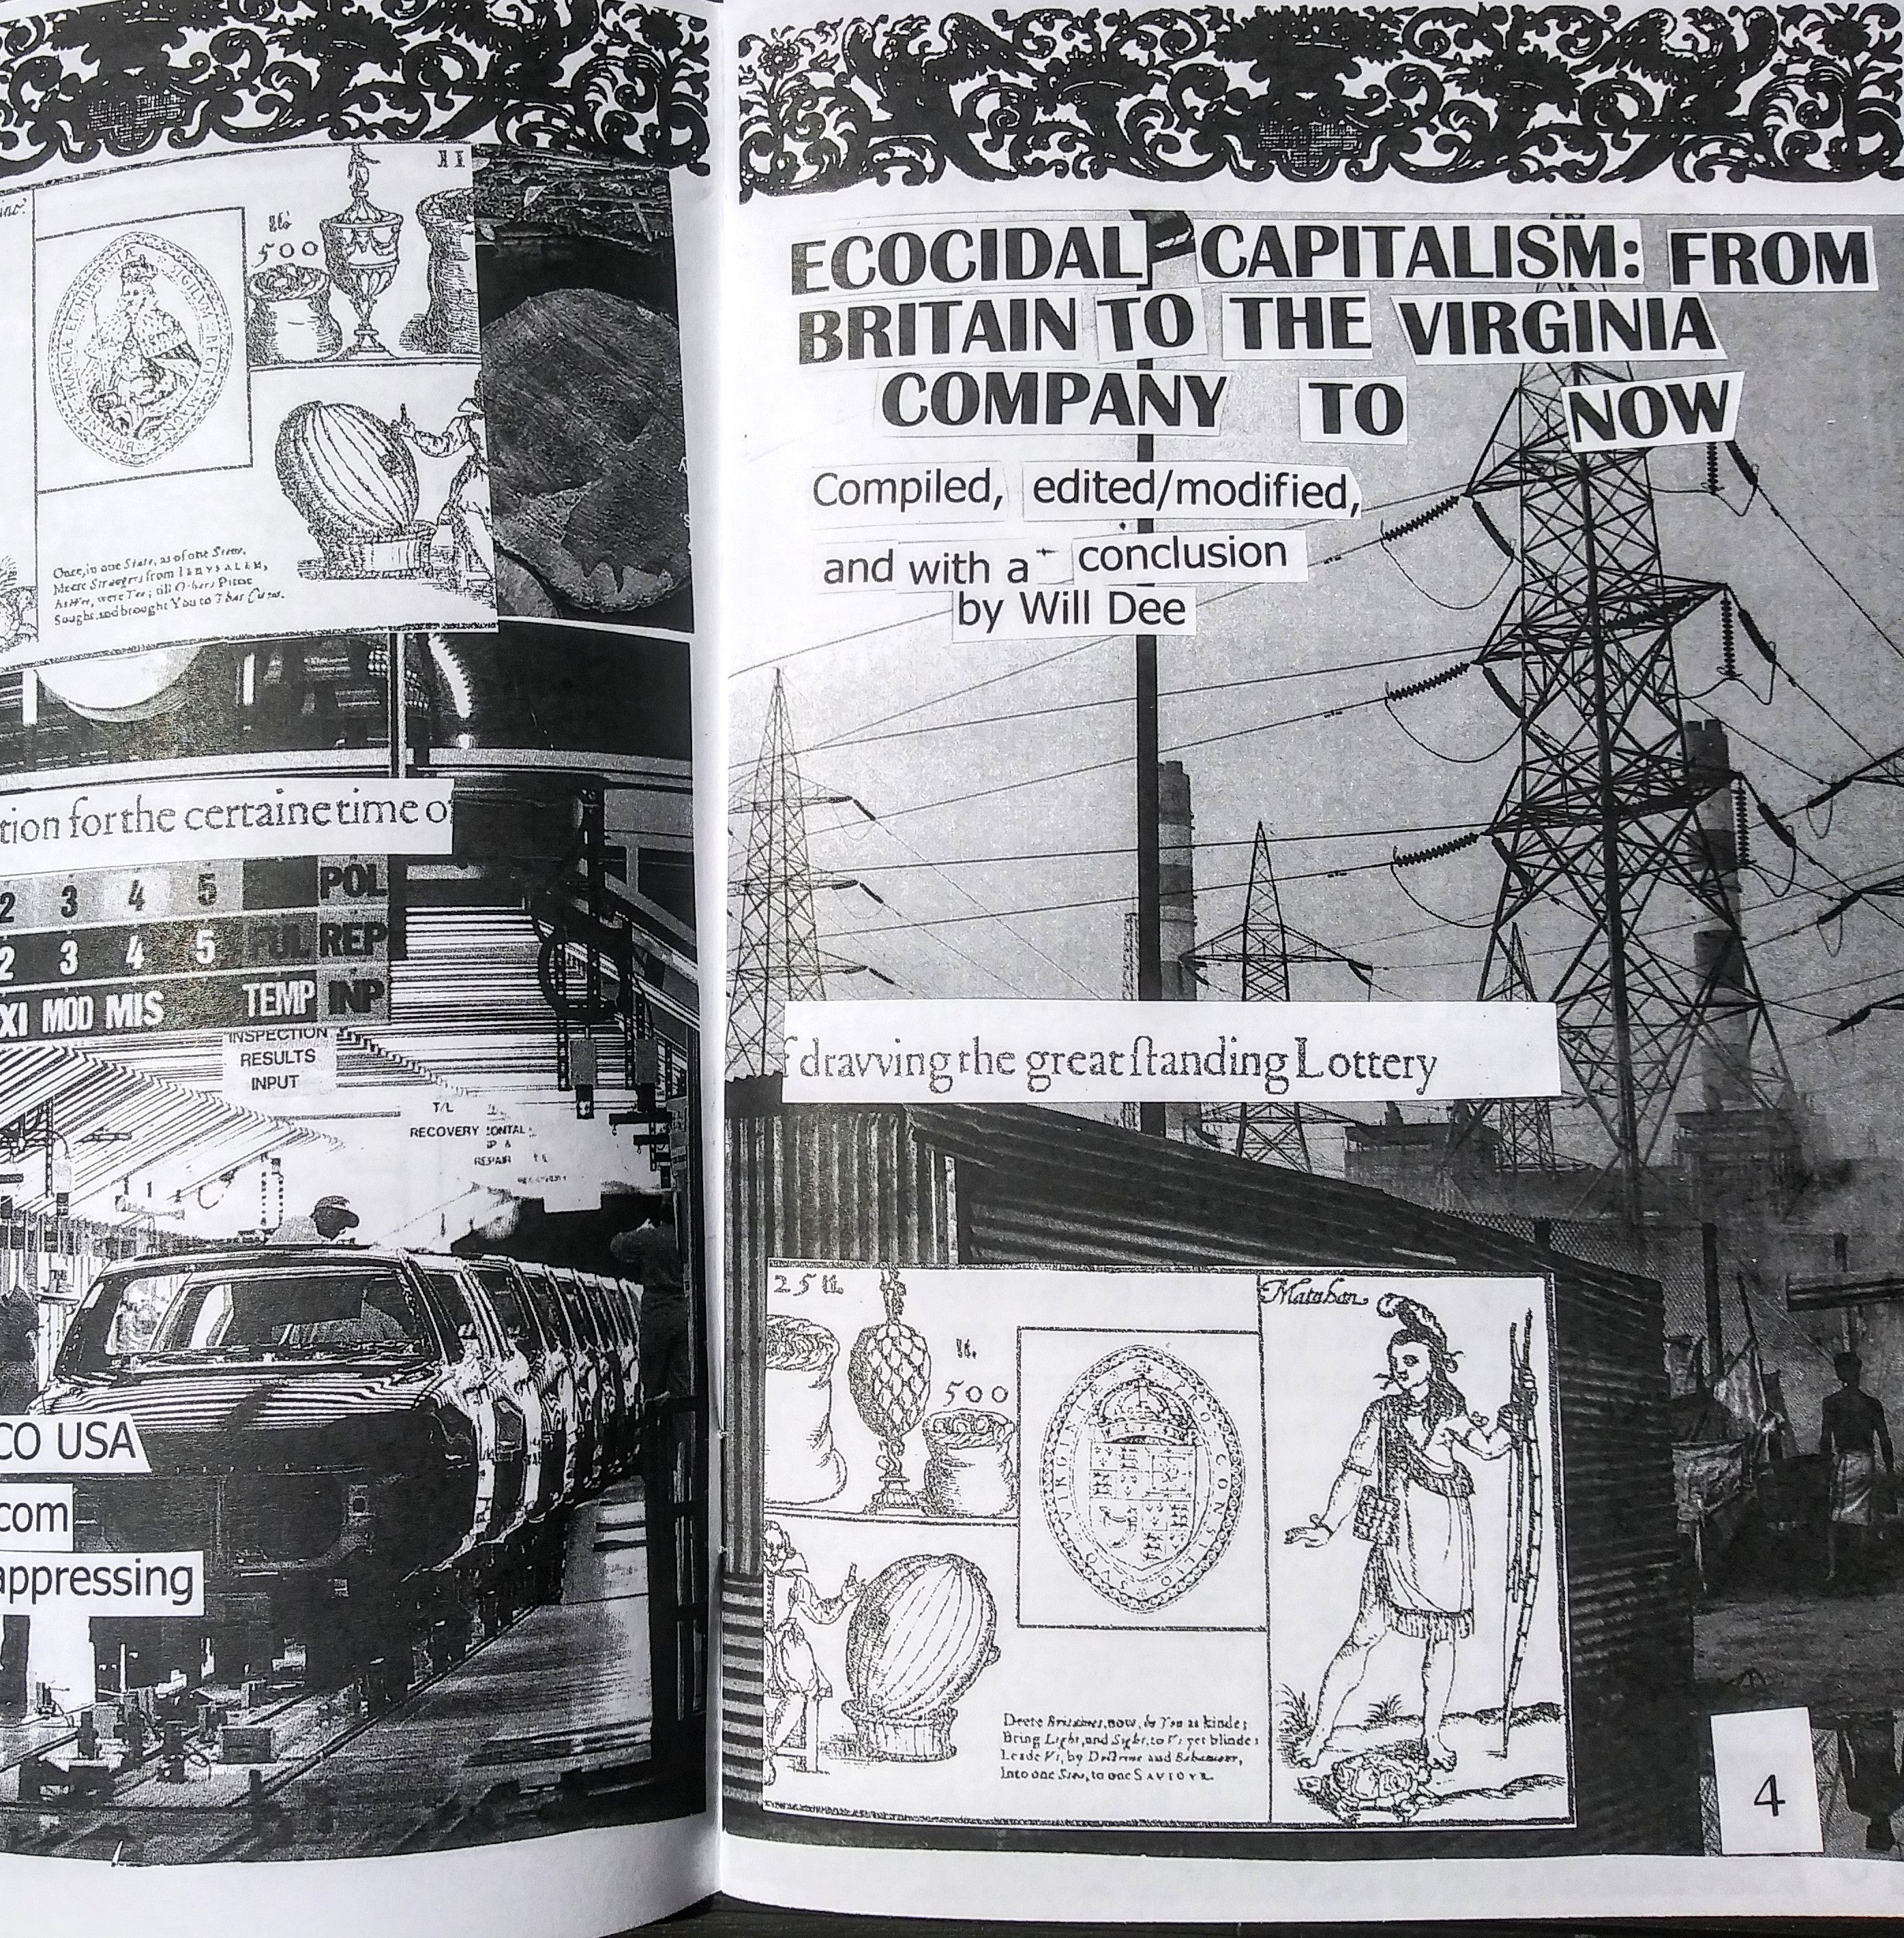 "Ecocidal Capitalism: From Britain to the Virginia Company to Now" (digital)